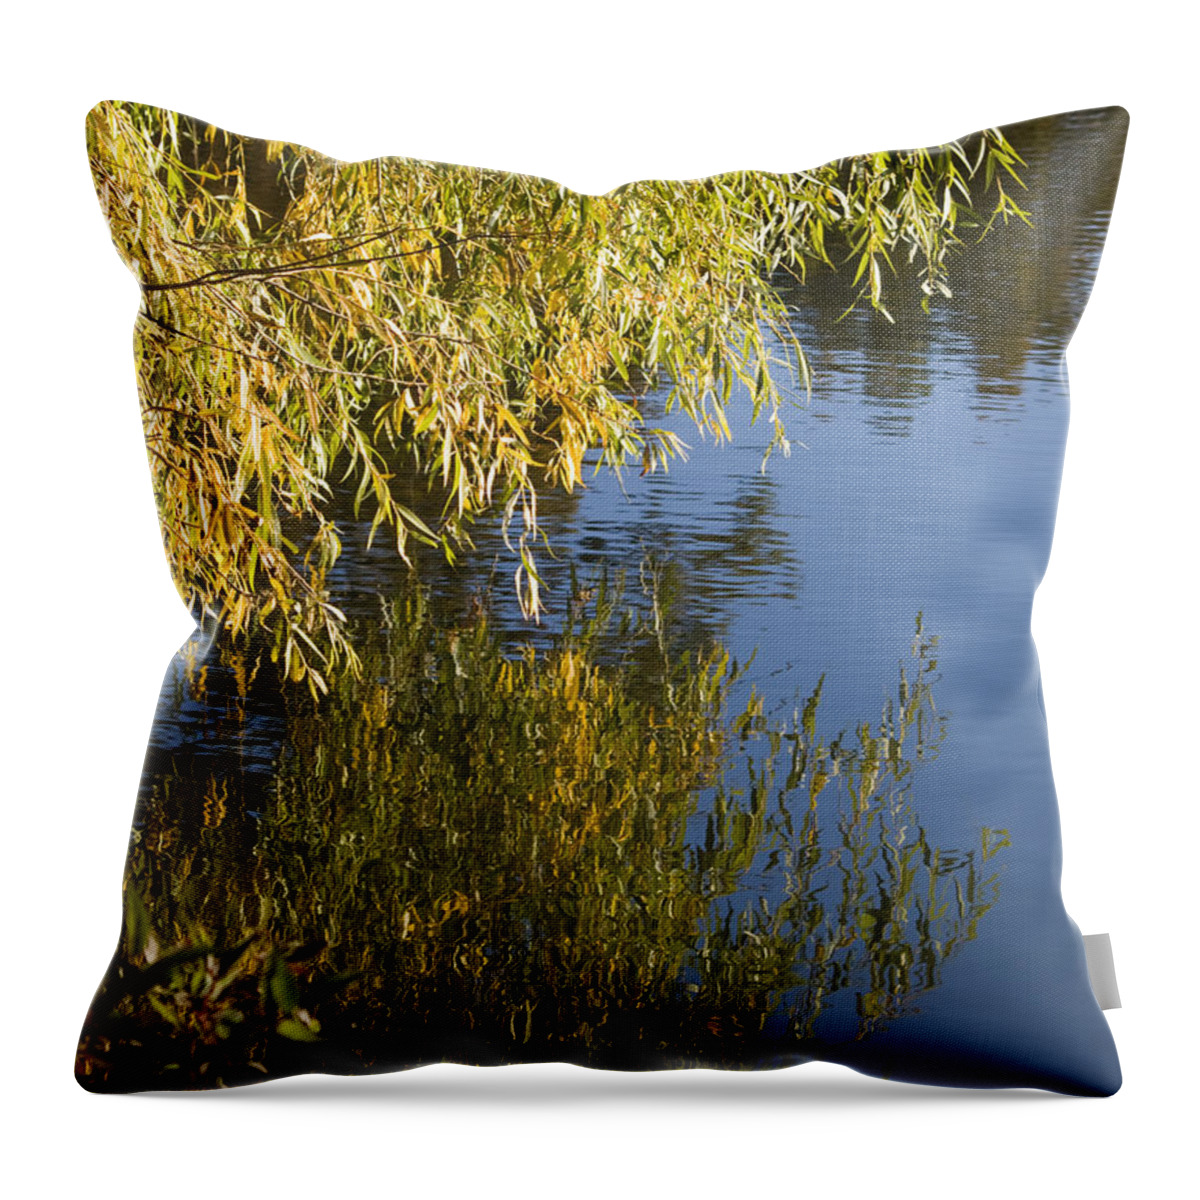 Mears Throw Pillow featuring the photograph Thinking by Tara Lynn